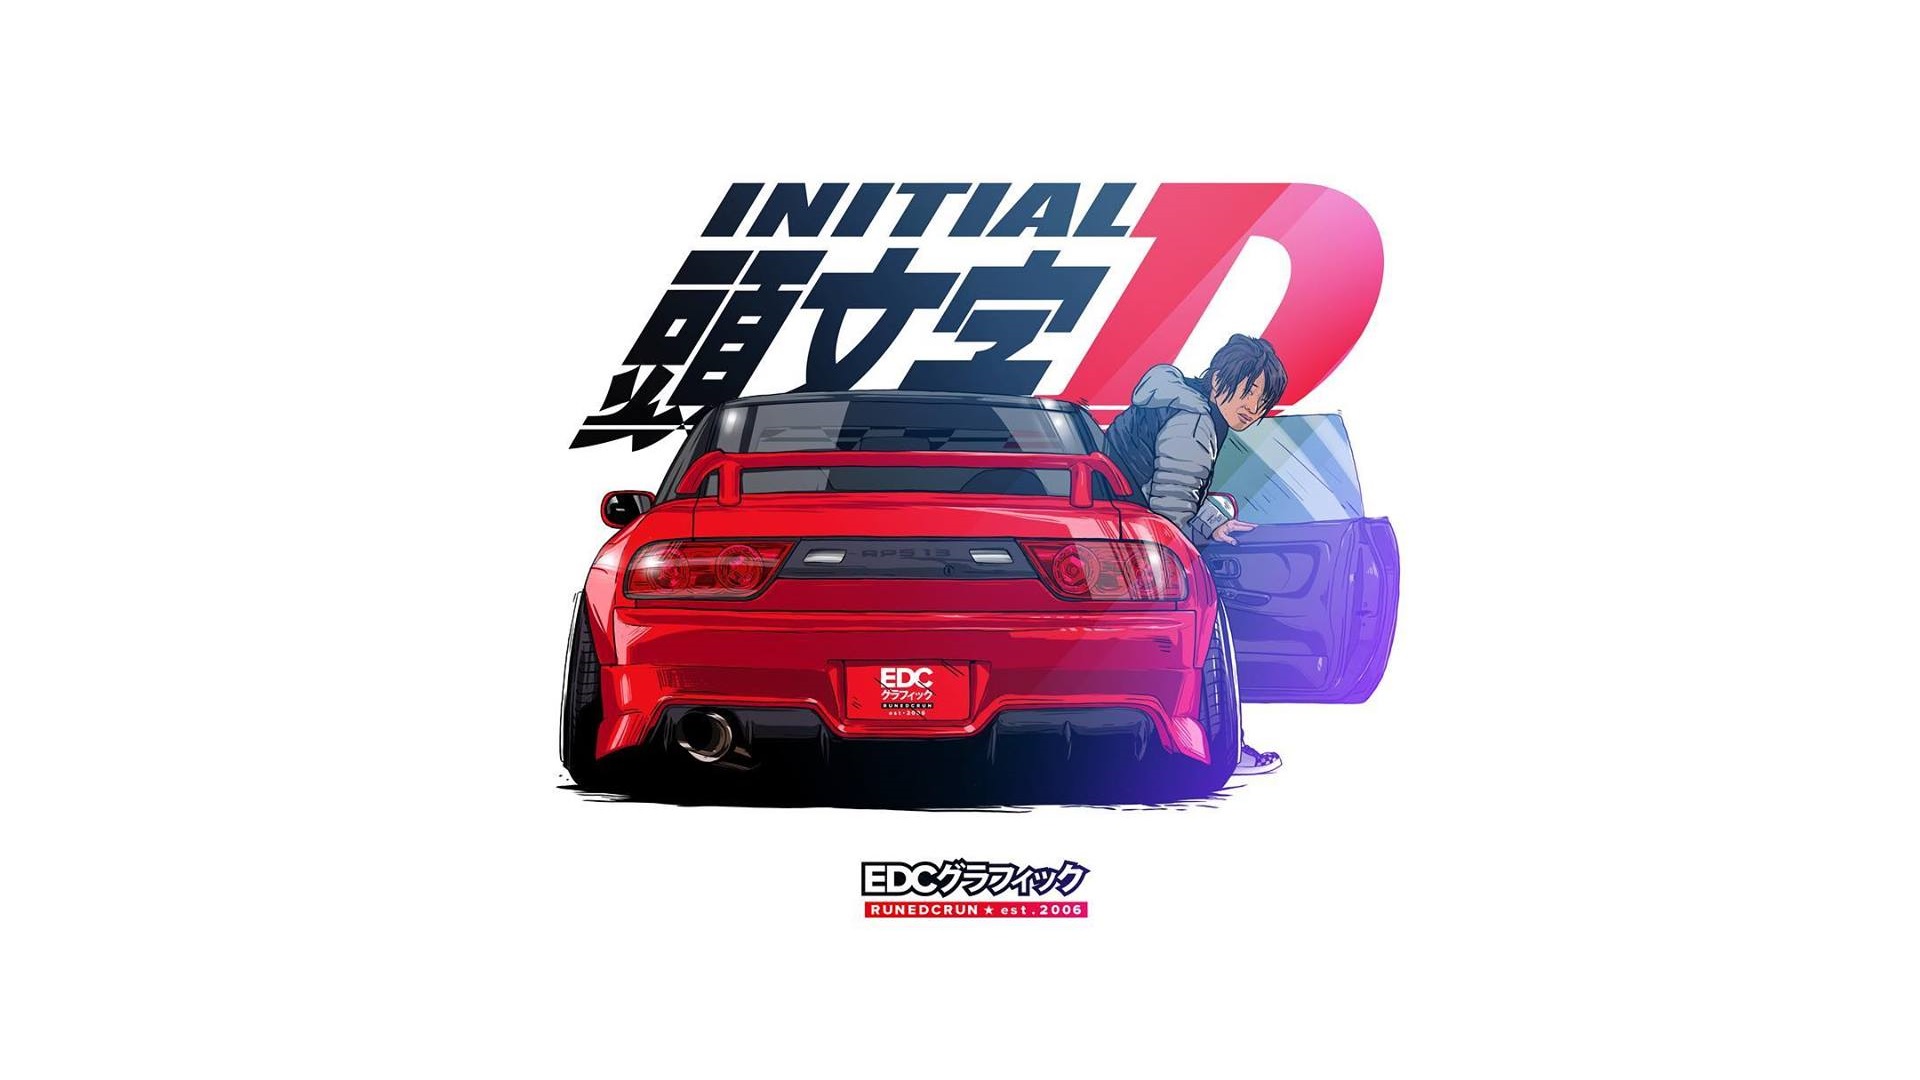 EDC Graphics Nissan 240SX Nissan Render JDM Initial D Anime Japanese Cars Rear View Red Cars 1920x1080